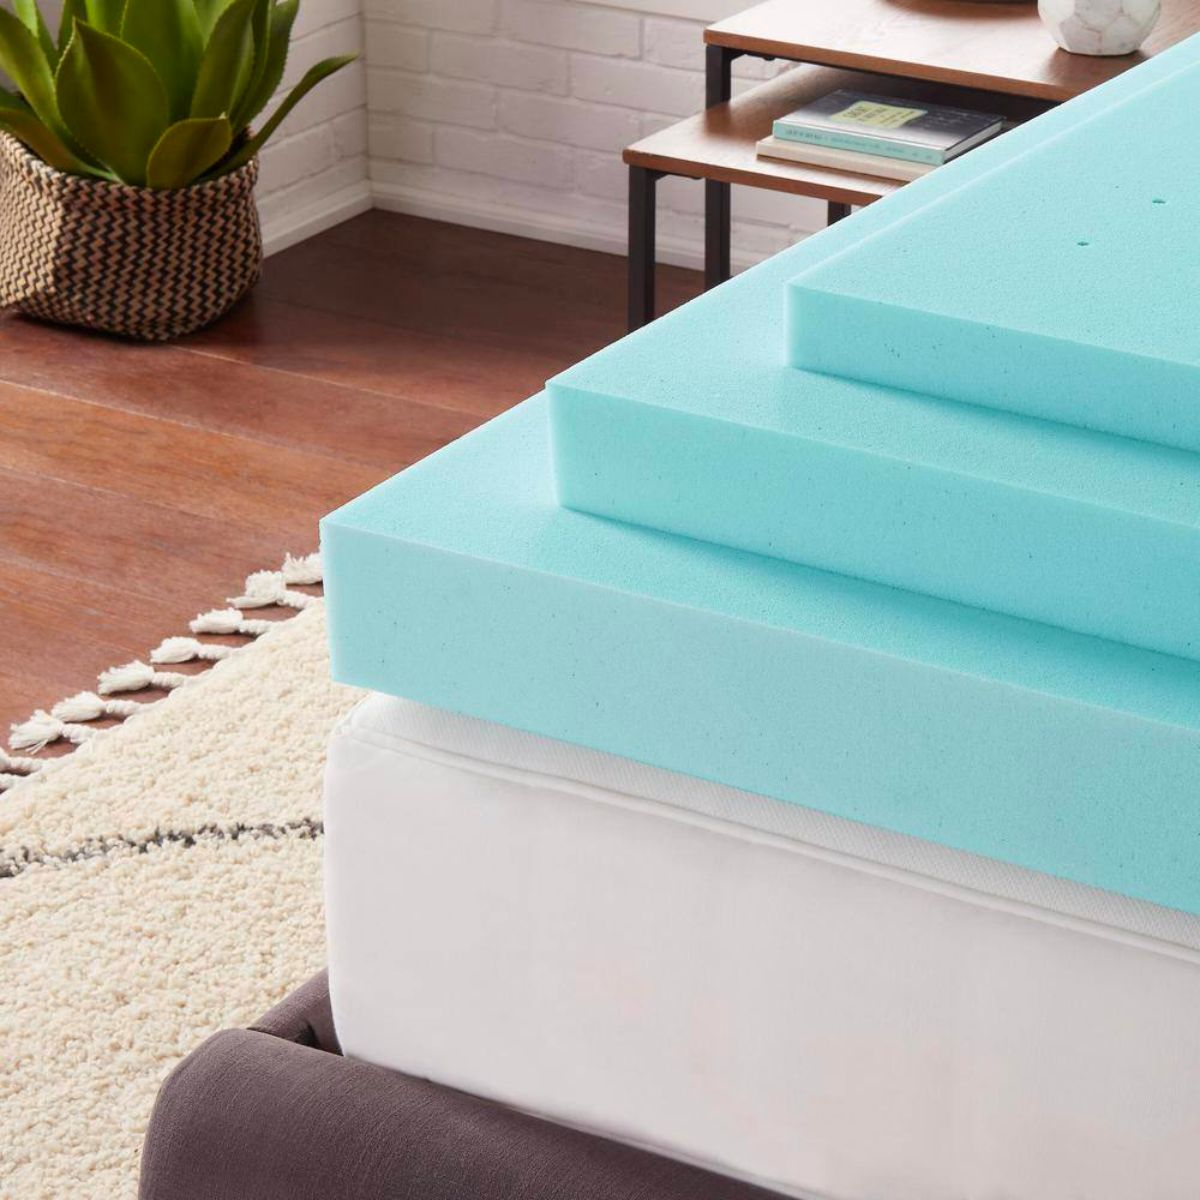 StyleWell 2,3, and 4 inch Gel Infused Memory Foam Mattress Toppers in size Twin